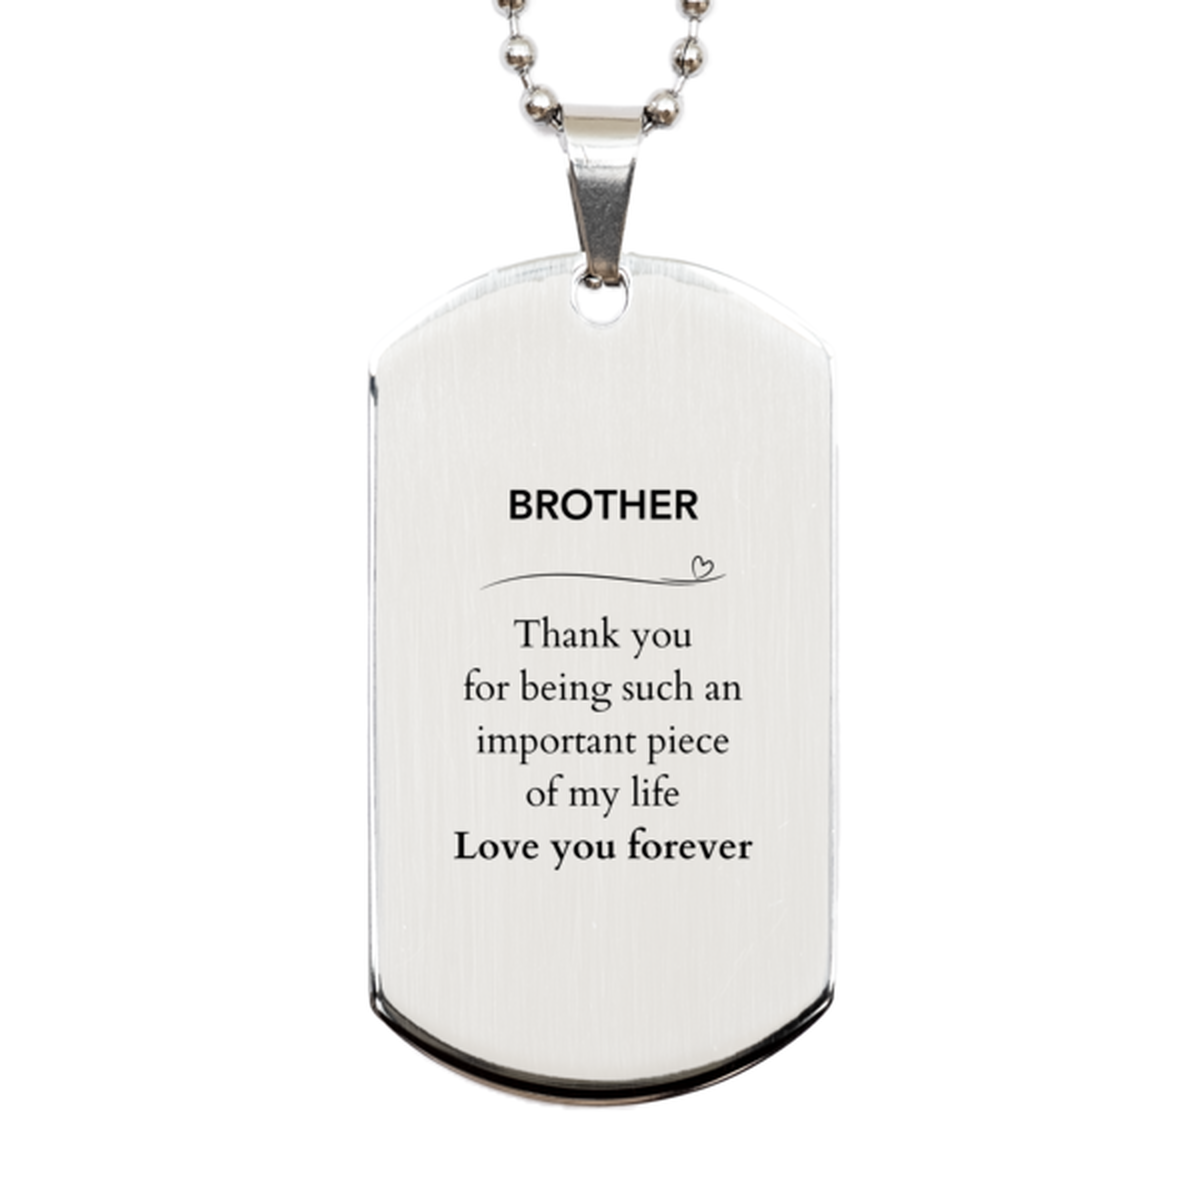 Appropriate Brother Silver Dog Tag Epic Birthday Gifts for Brother Thank you for being such an important piece of my life Brother Christmas Mothers Fathers Day